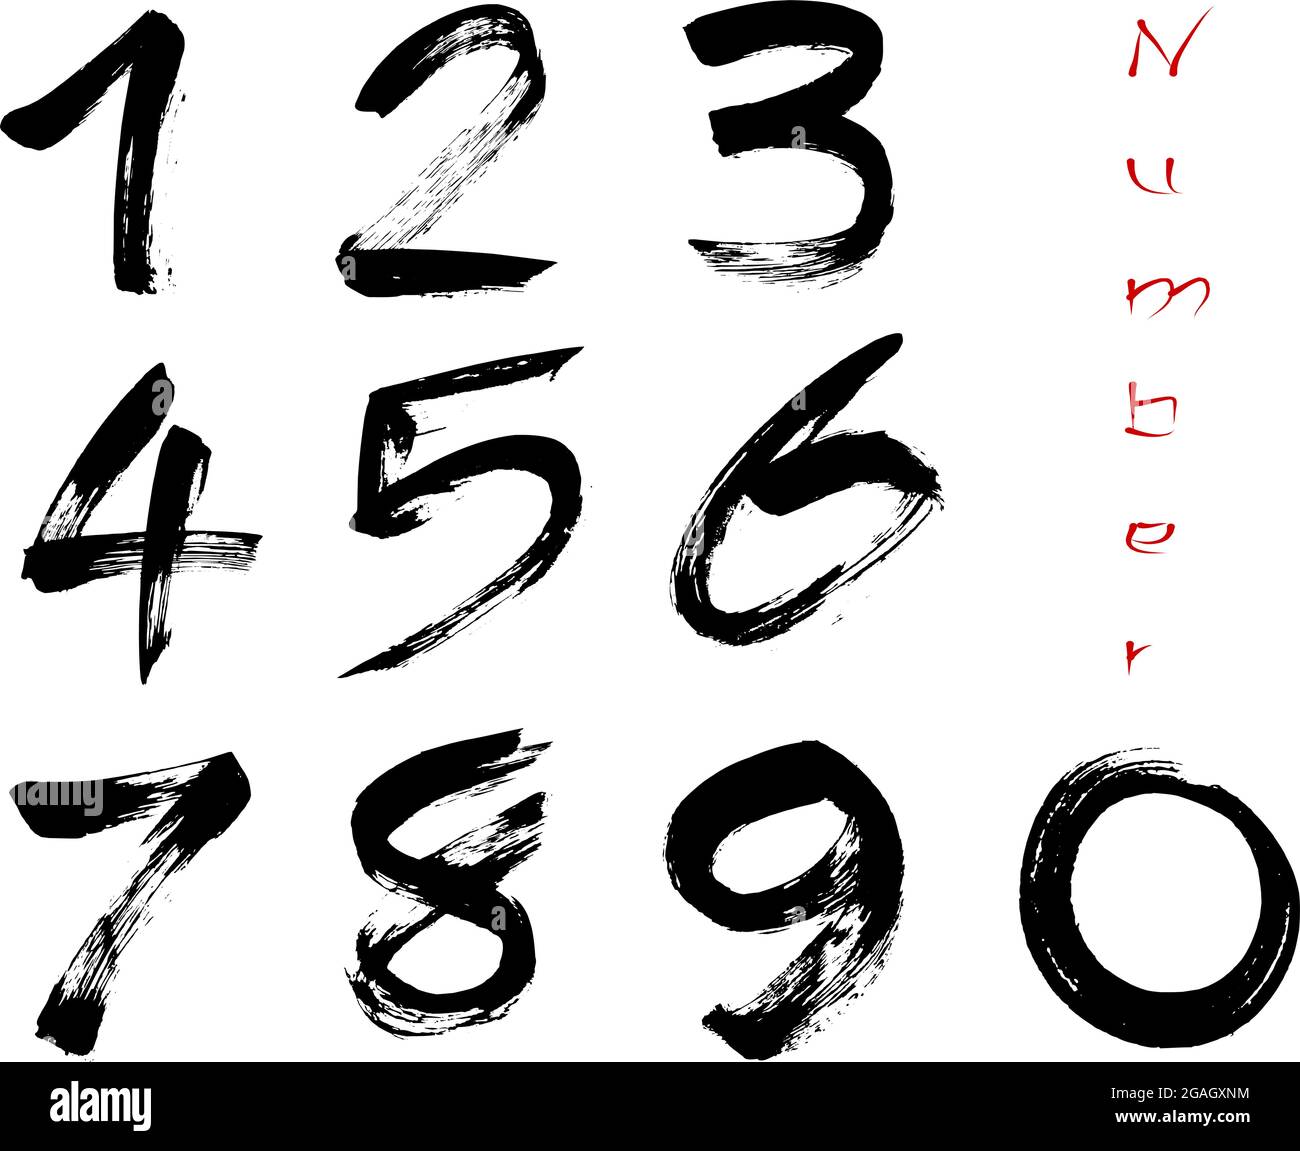 Numbers 0-9 written with a brush on a white background Stock Vector